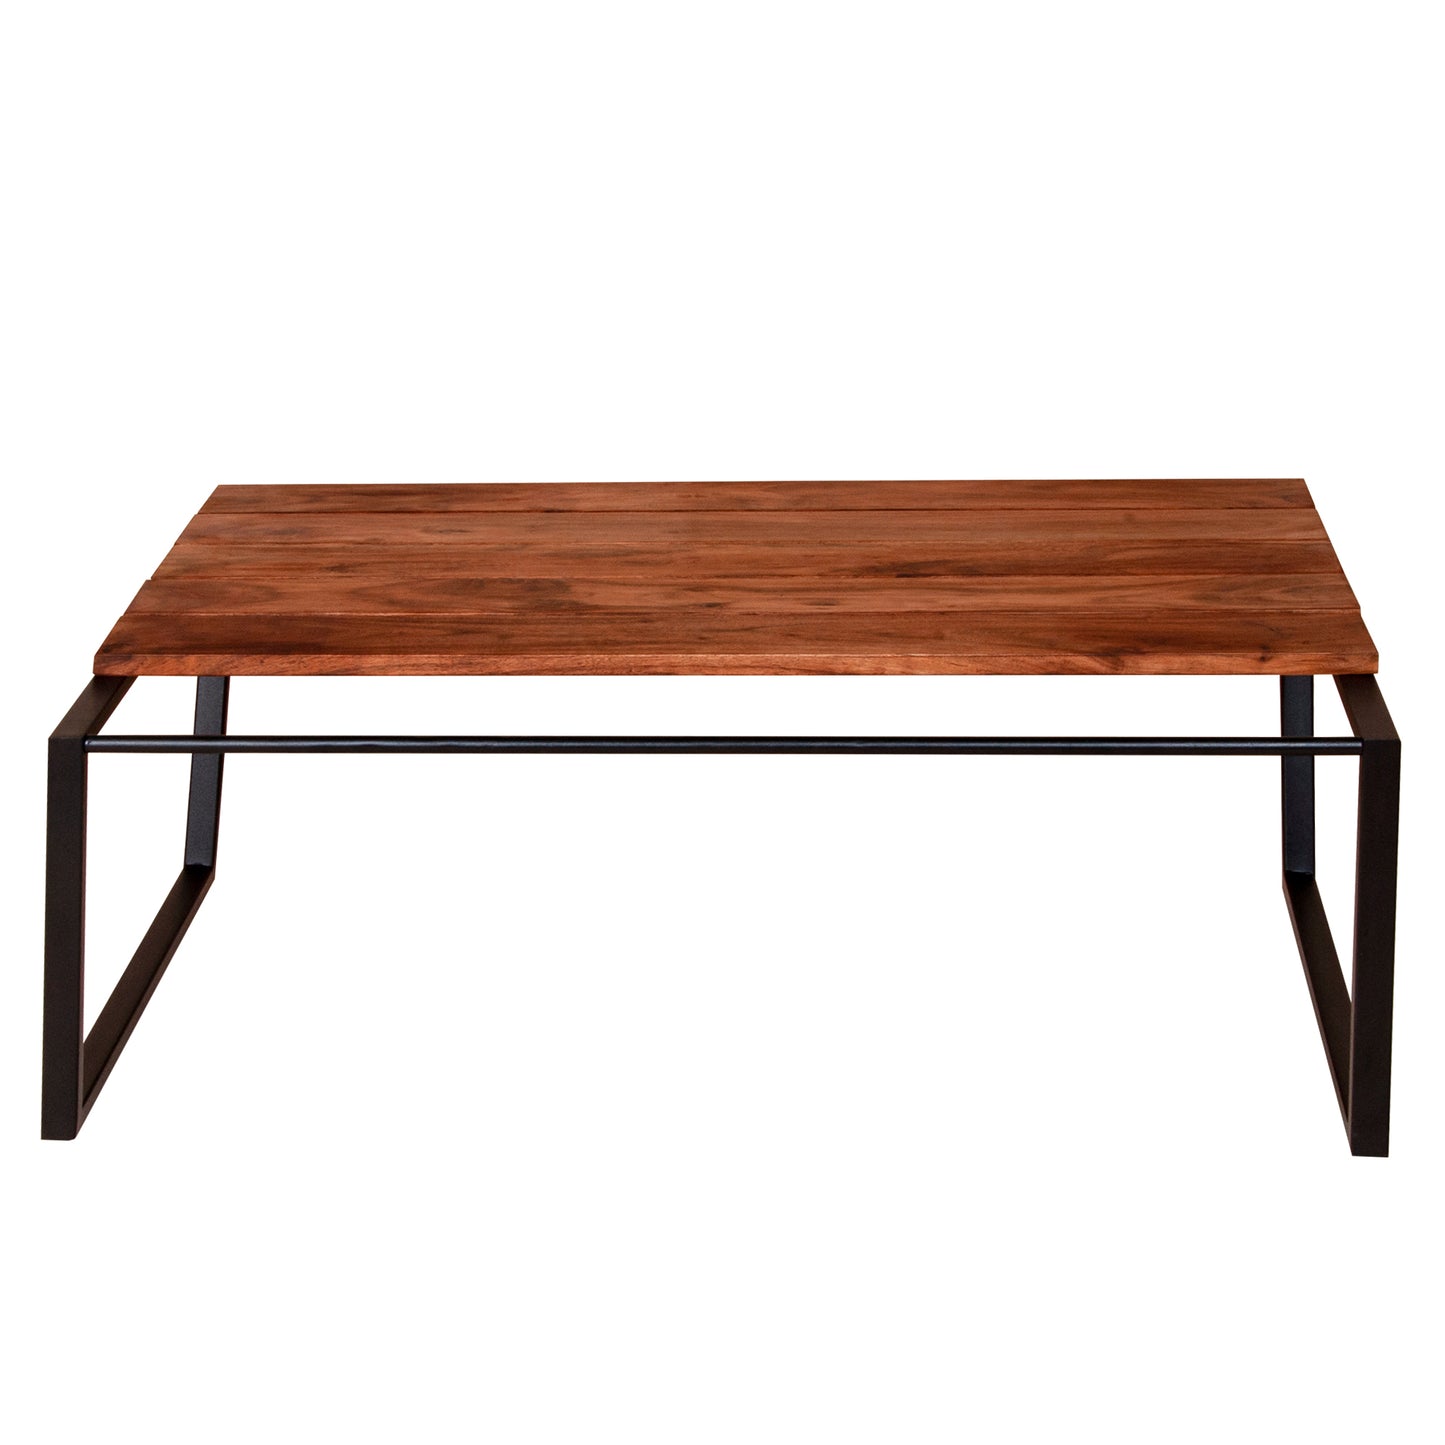 Rectangular Industrial-Style Coffee Table with Acacia Wood Top and Metal Frame, Warm Brown and Black